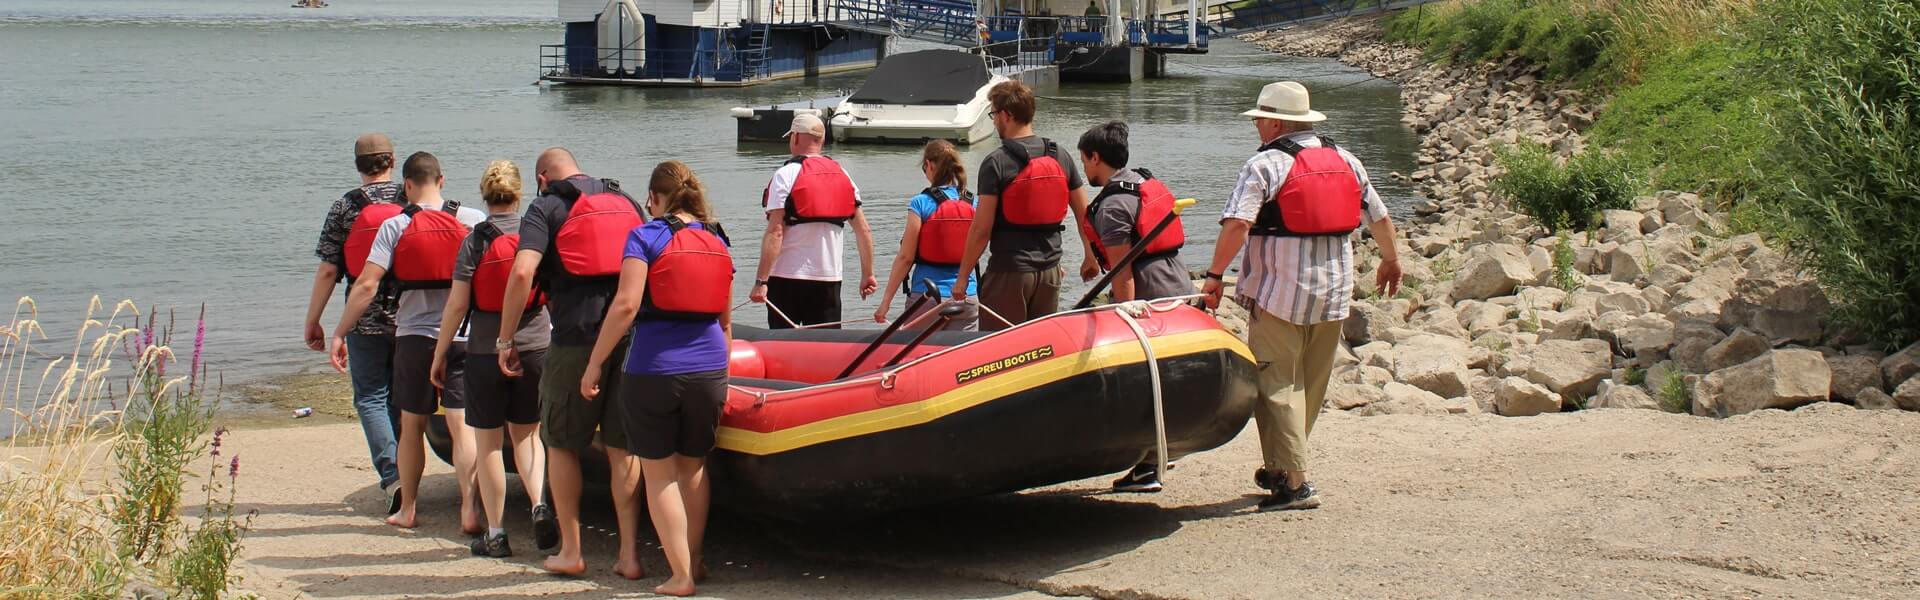 Successful together in rafting: team building ideas and events by b-ceed: solving conflicts